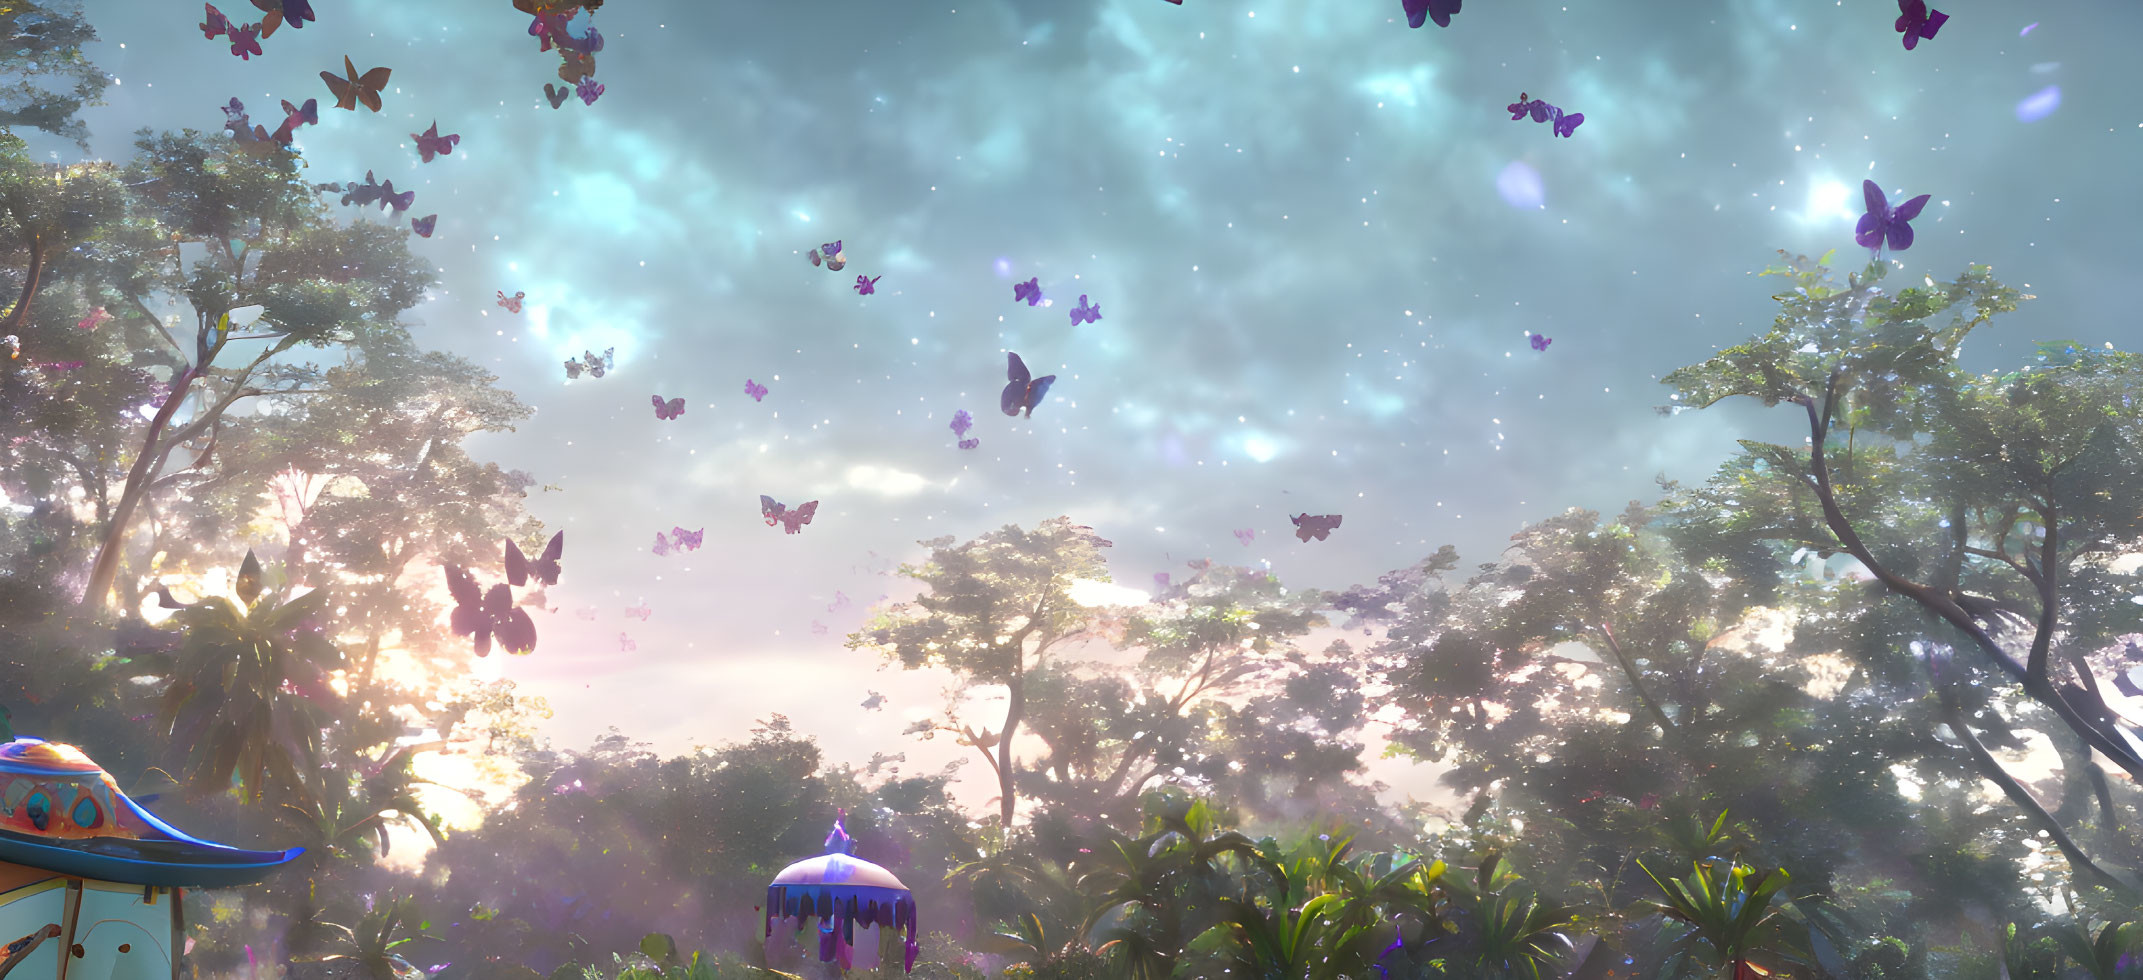 Fantasy forest with colorful butterflies, glowing plants, whimsical structures